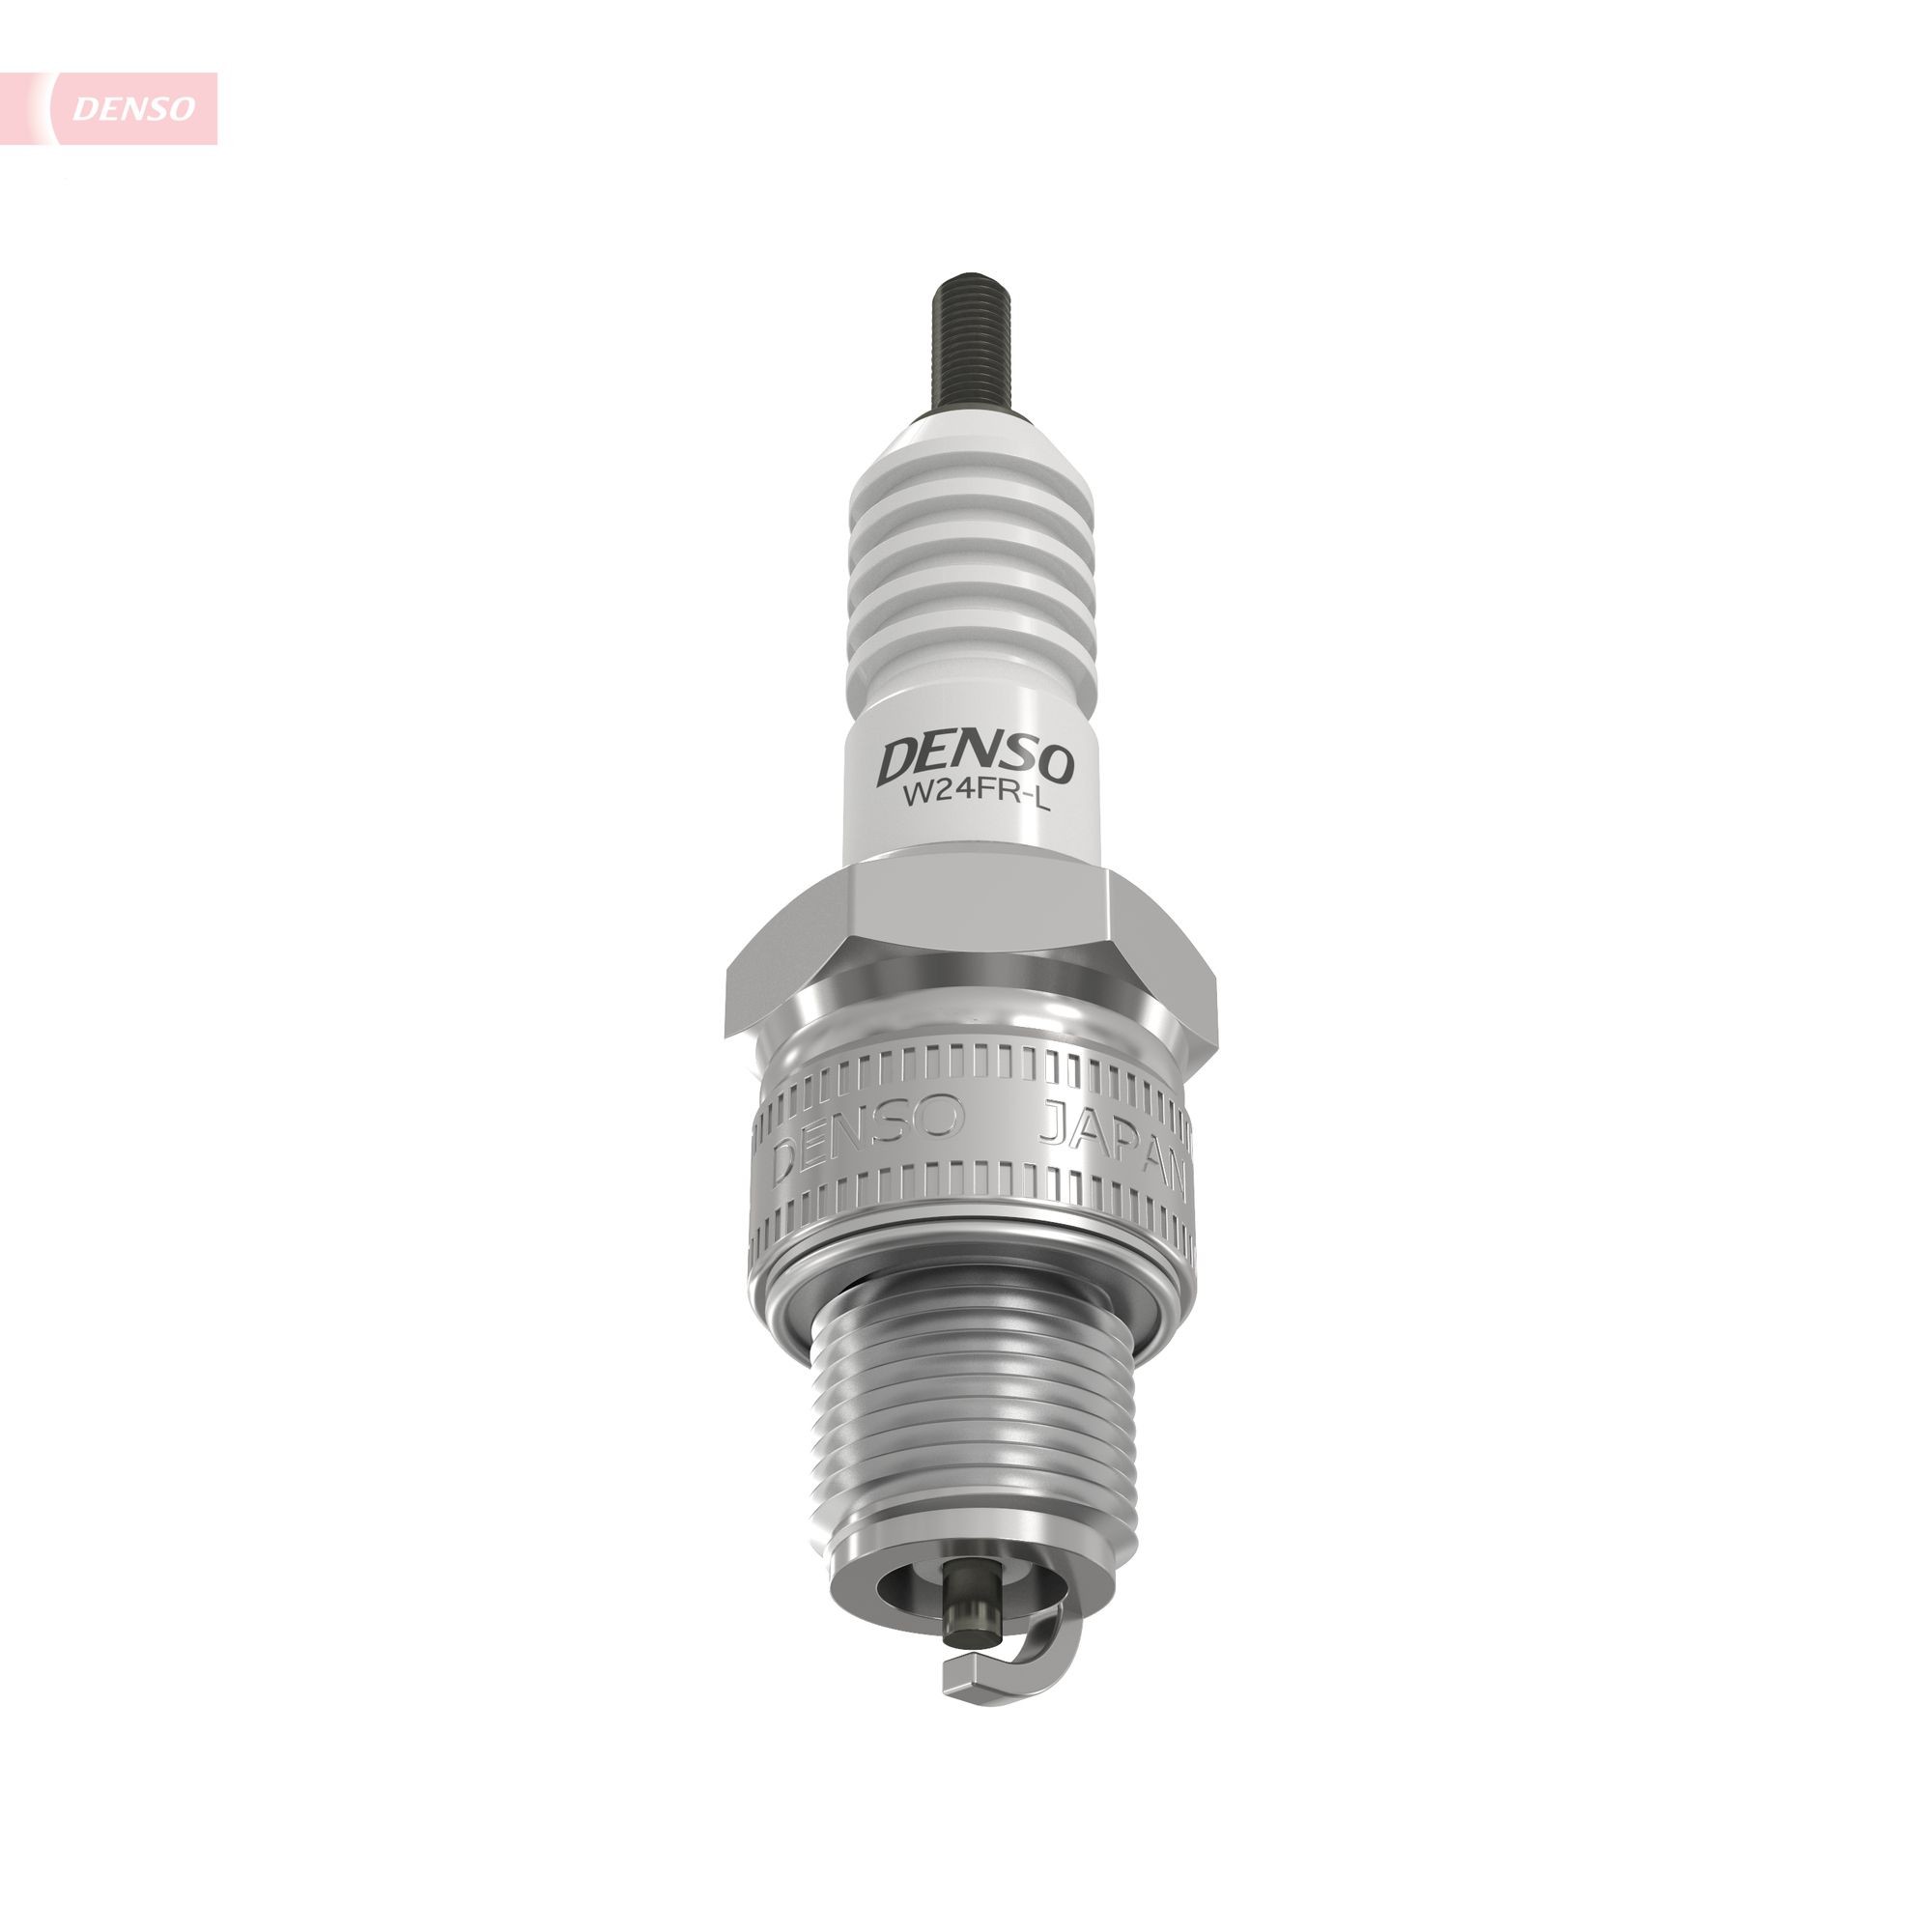 W24FRL Spark plug DENSO W24FR-L review and test